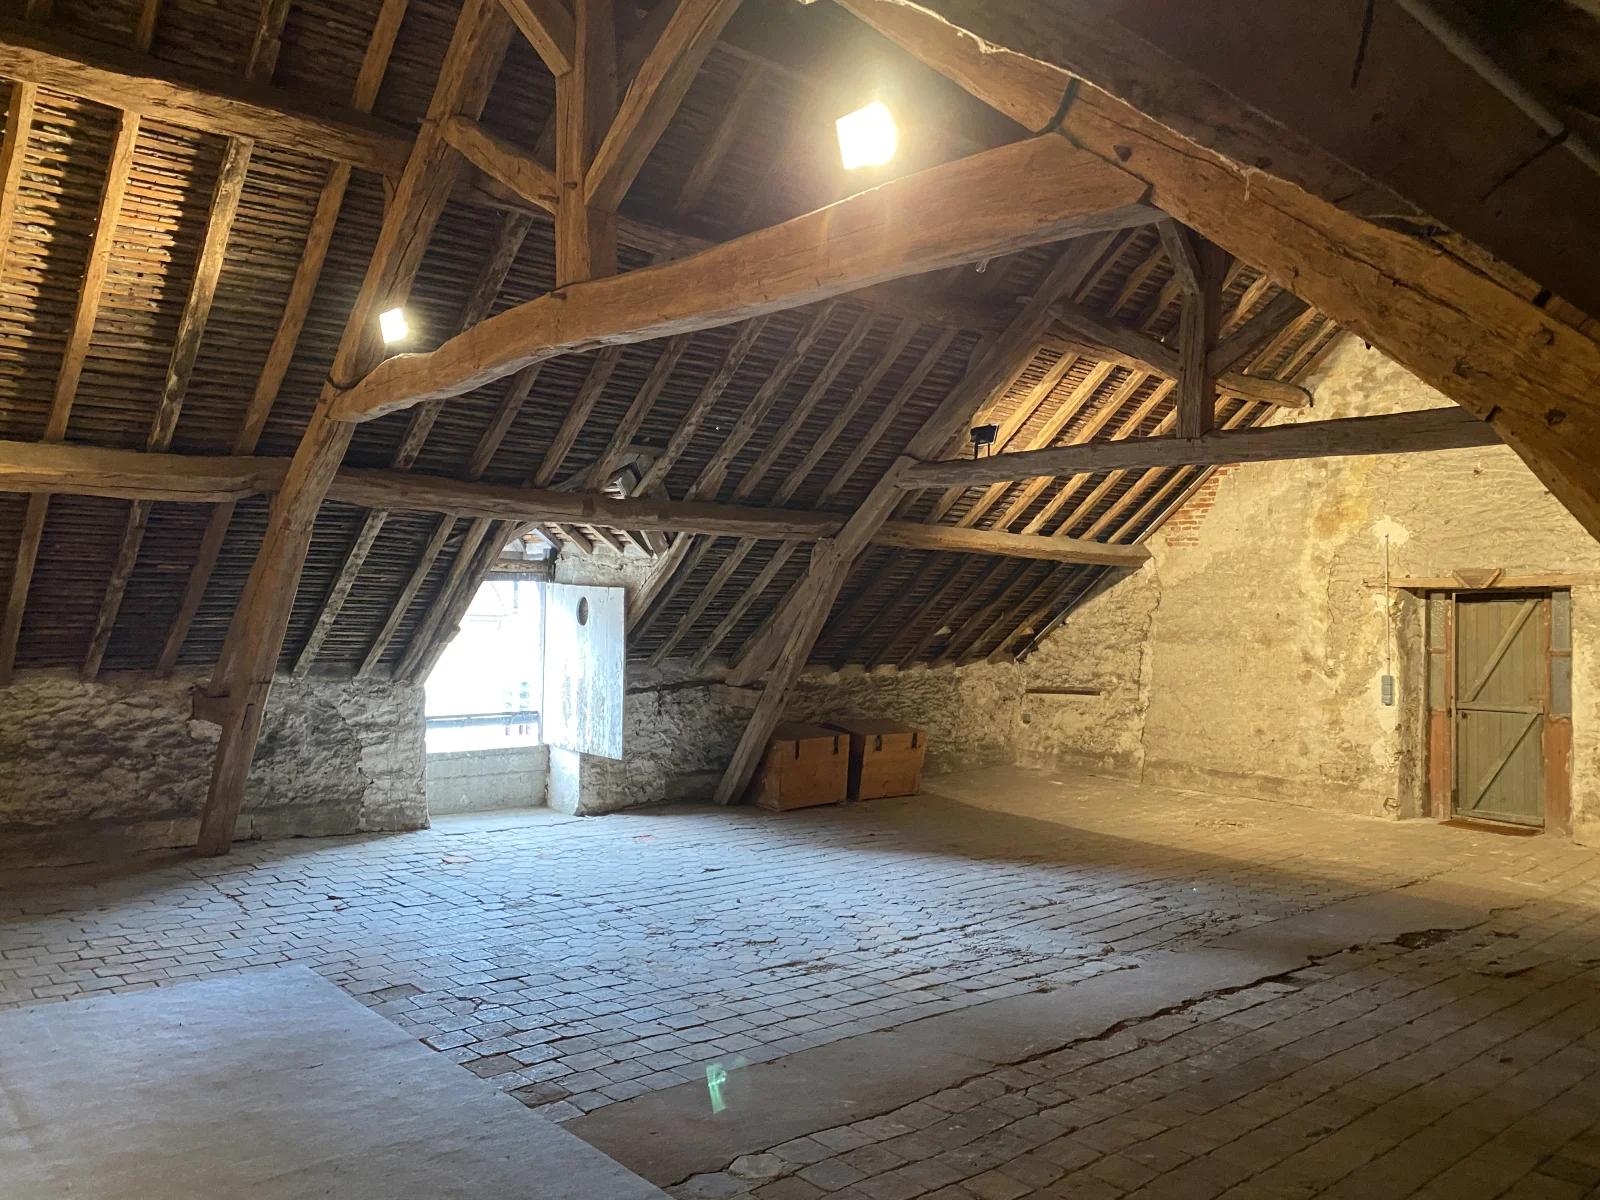 Meeting room in Large attic space in old house. - 1